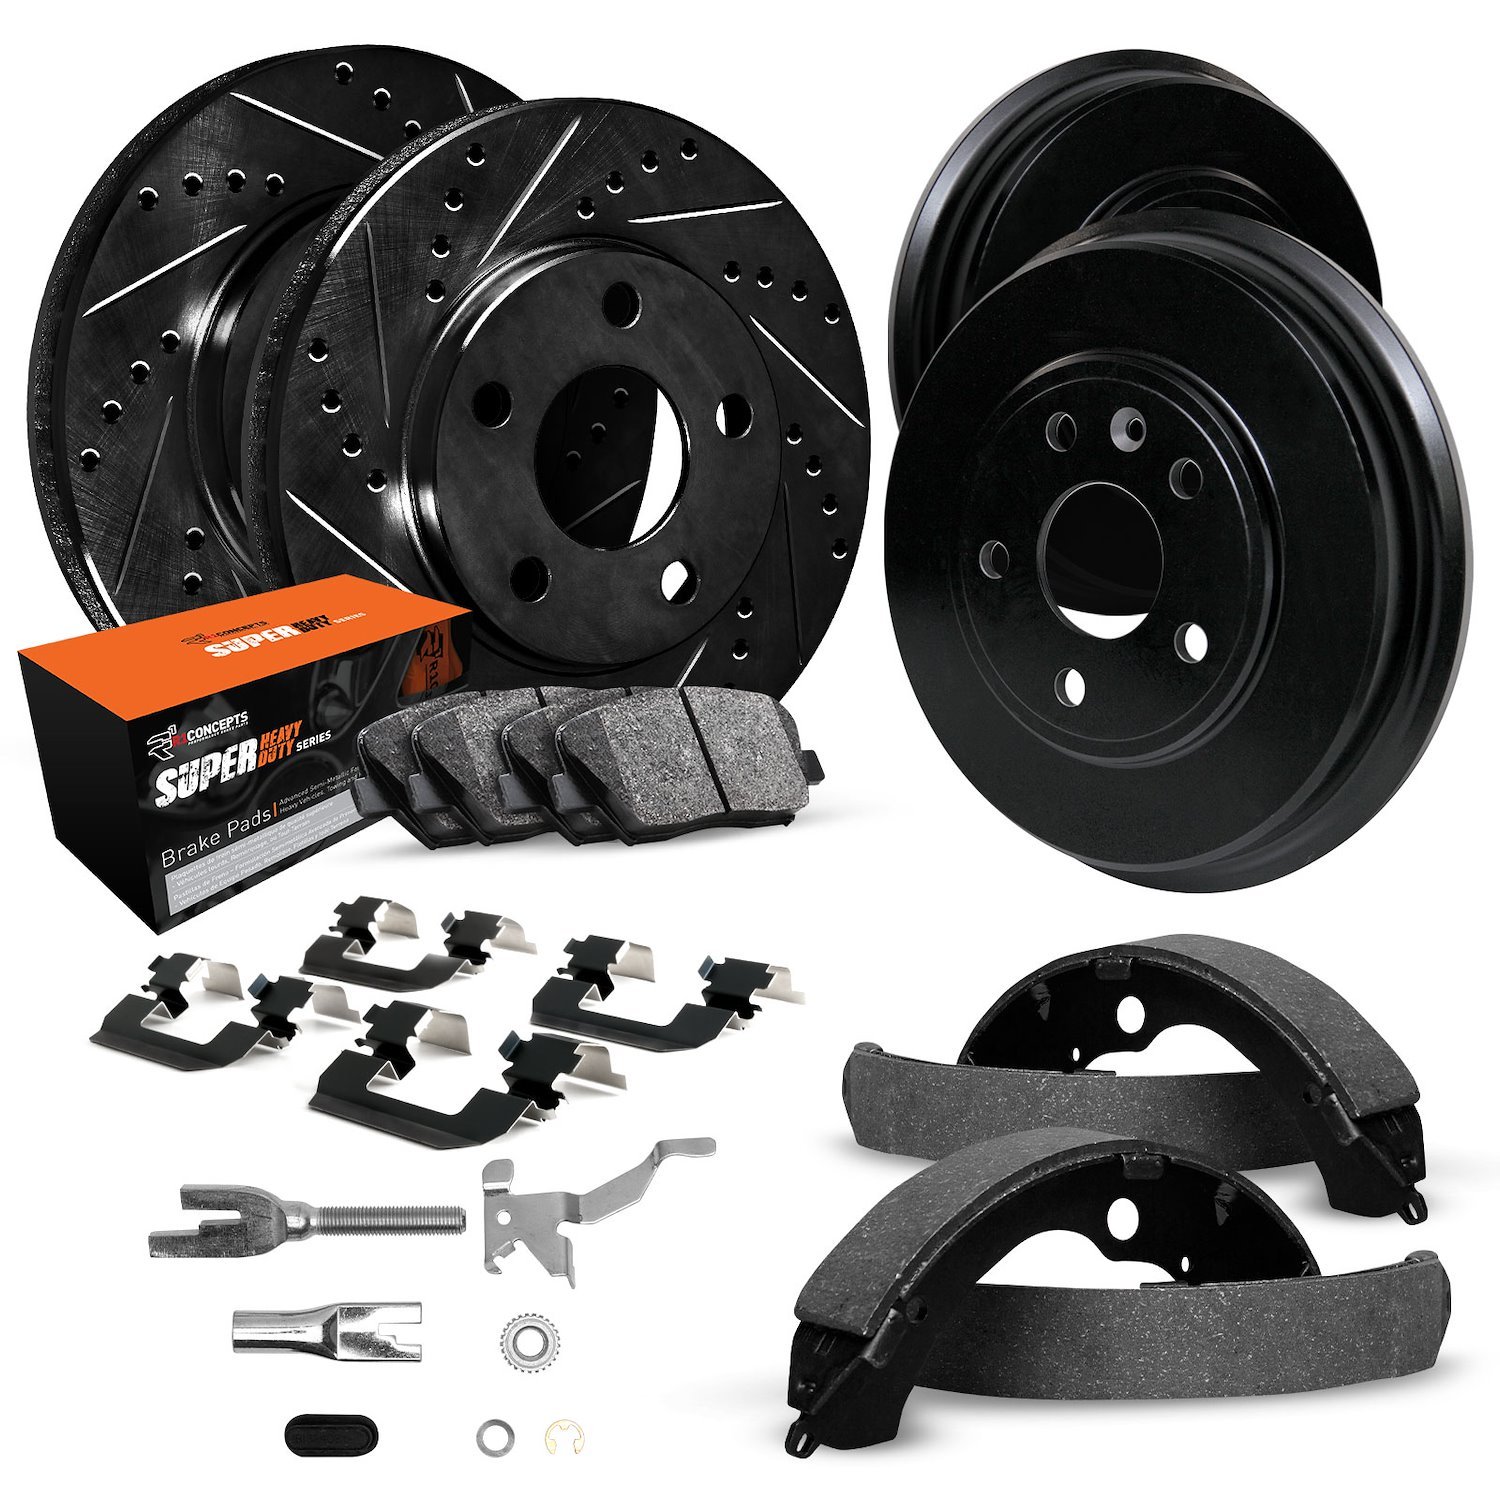 E-Line Drilled/Slotted Black Rotor & Drum Set w/Super-Duty Pads, Shoes, Hardware/Adjusters, 1983-1994 Ford/Lincoln/Mercury/Mazda